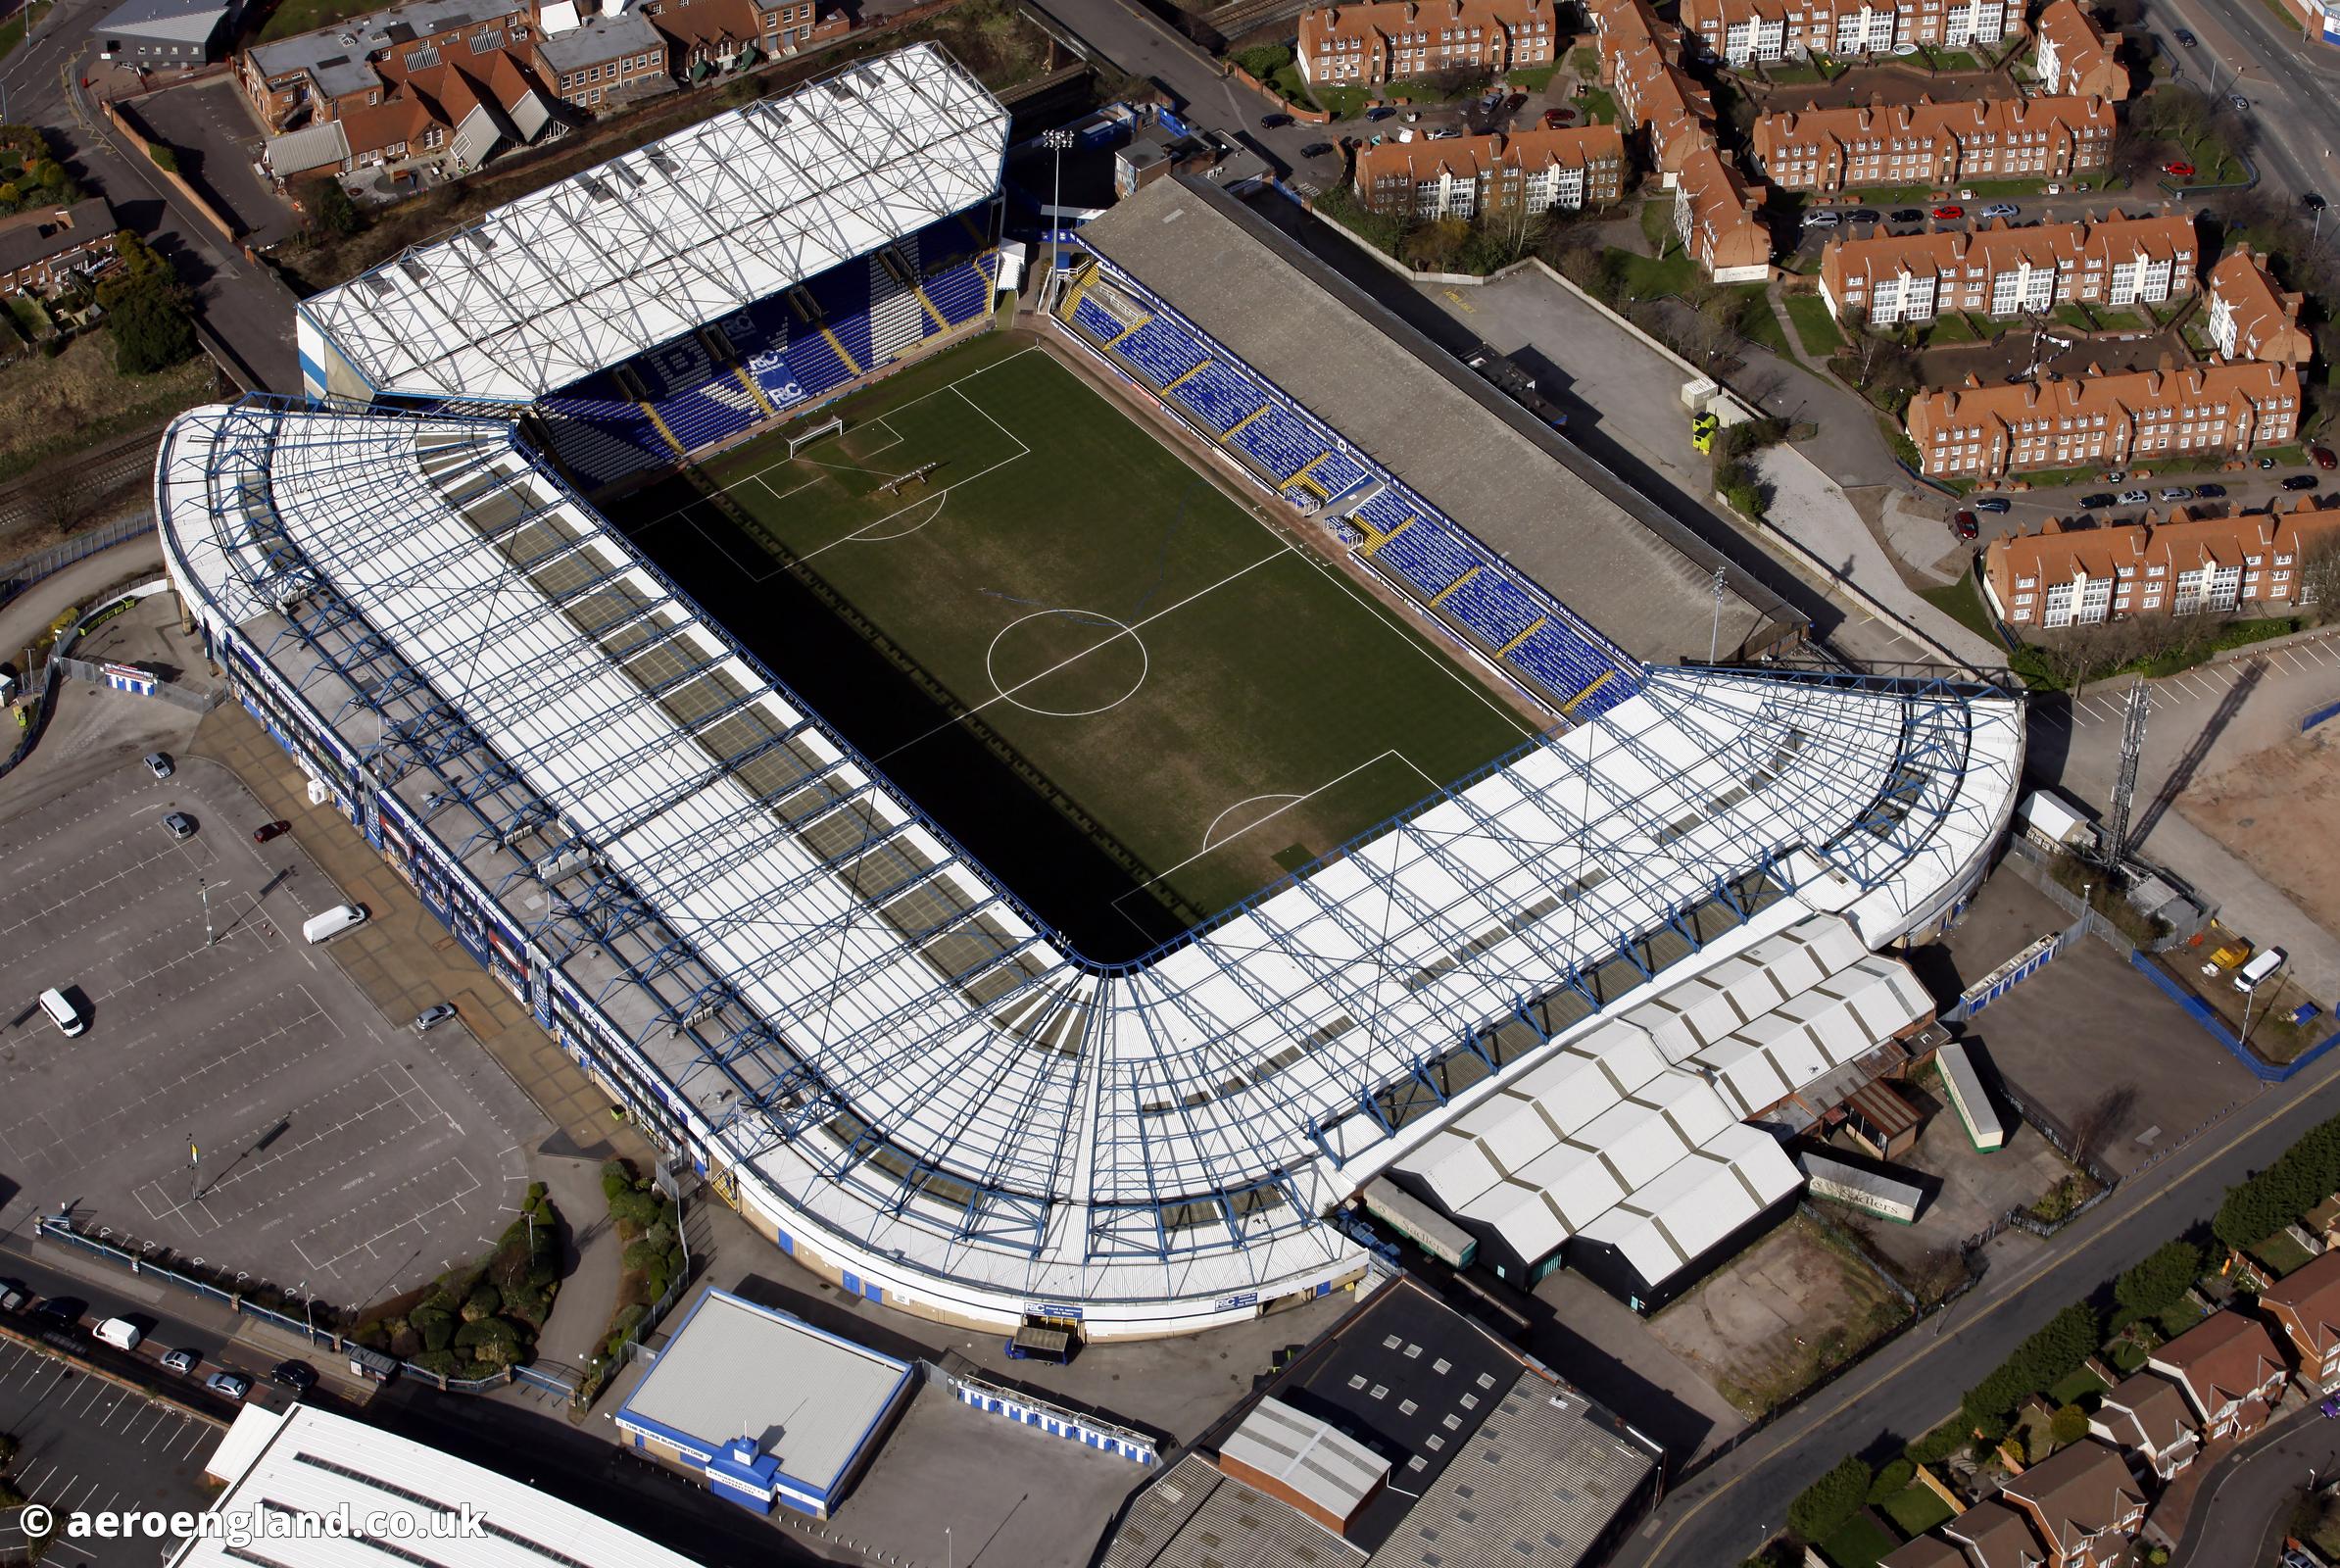 St Andrews Stadium Capacity, Tickets, Seating Plan, Records, Location, Parking